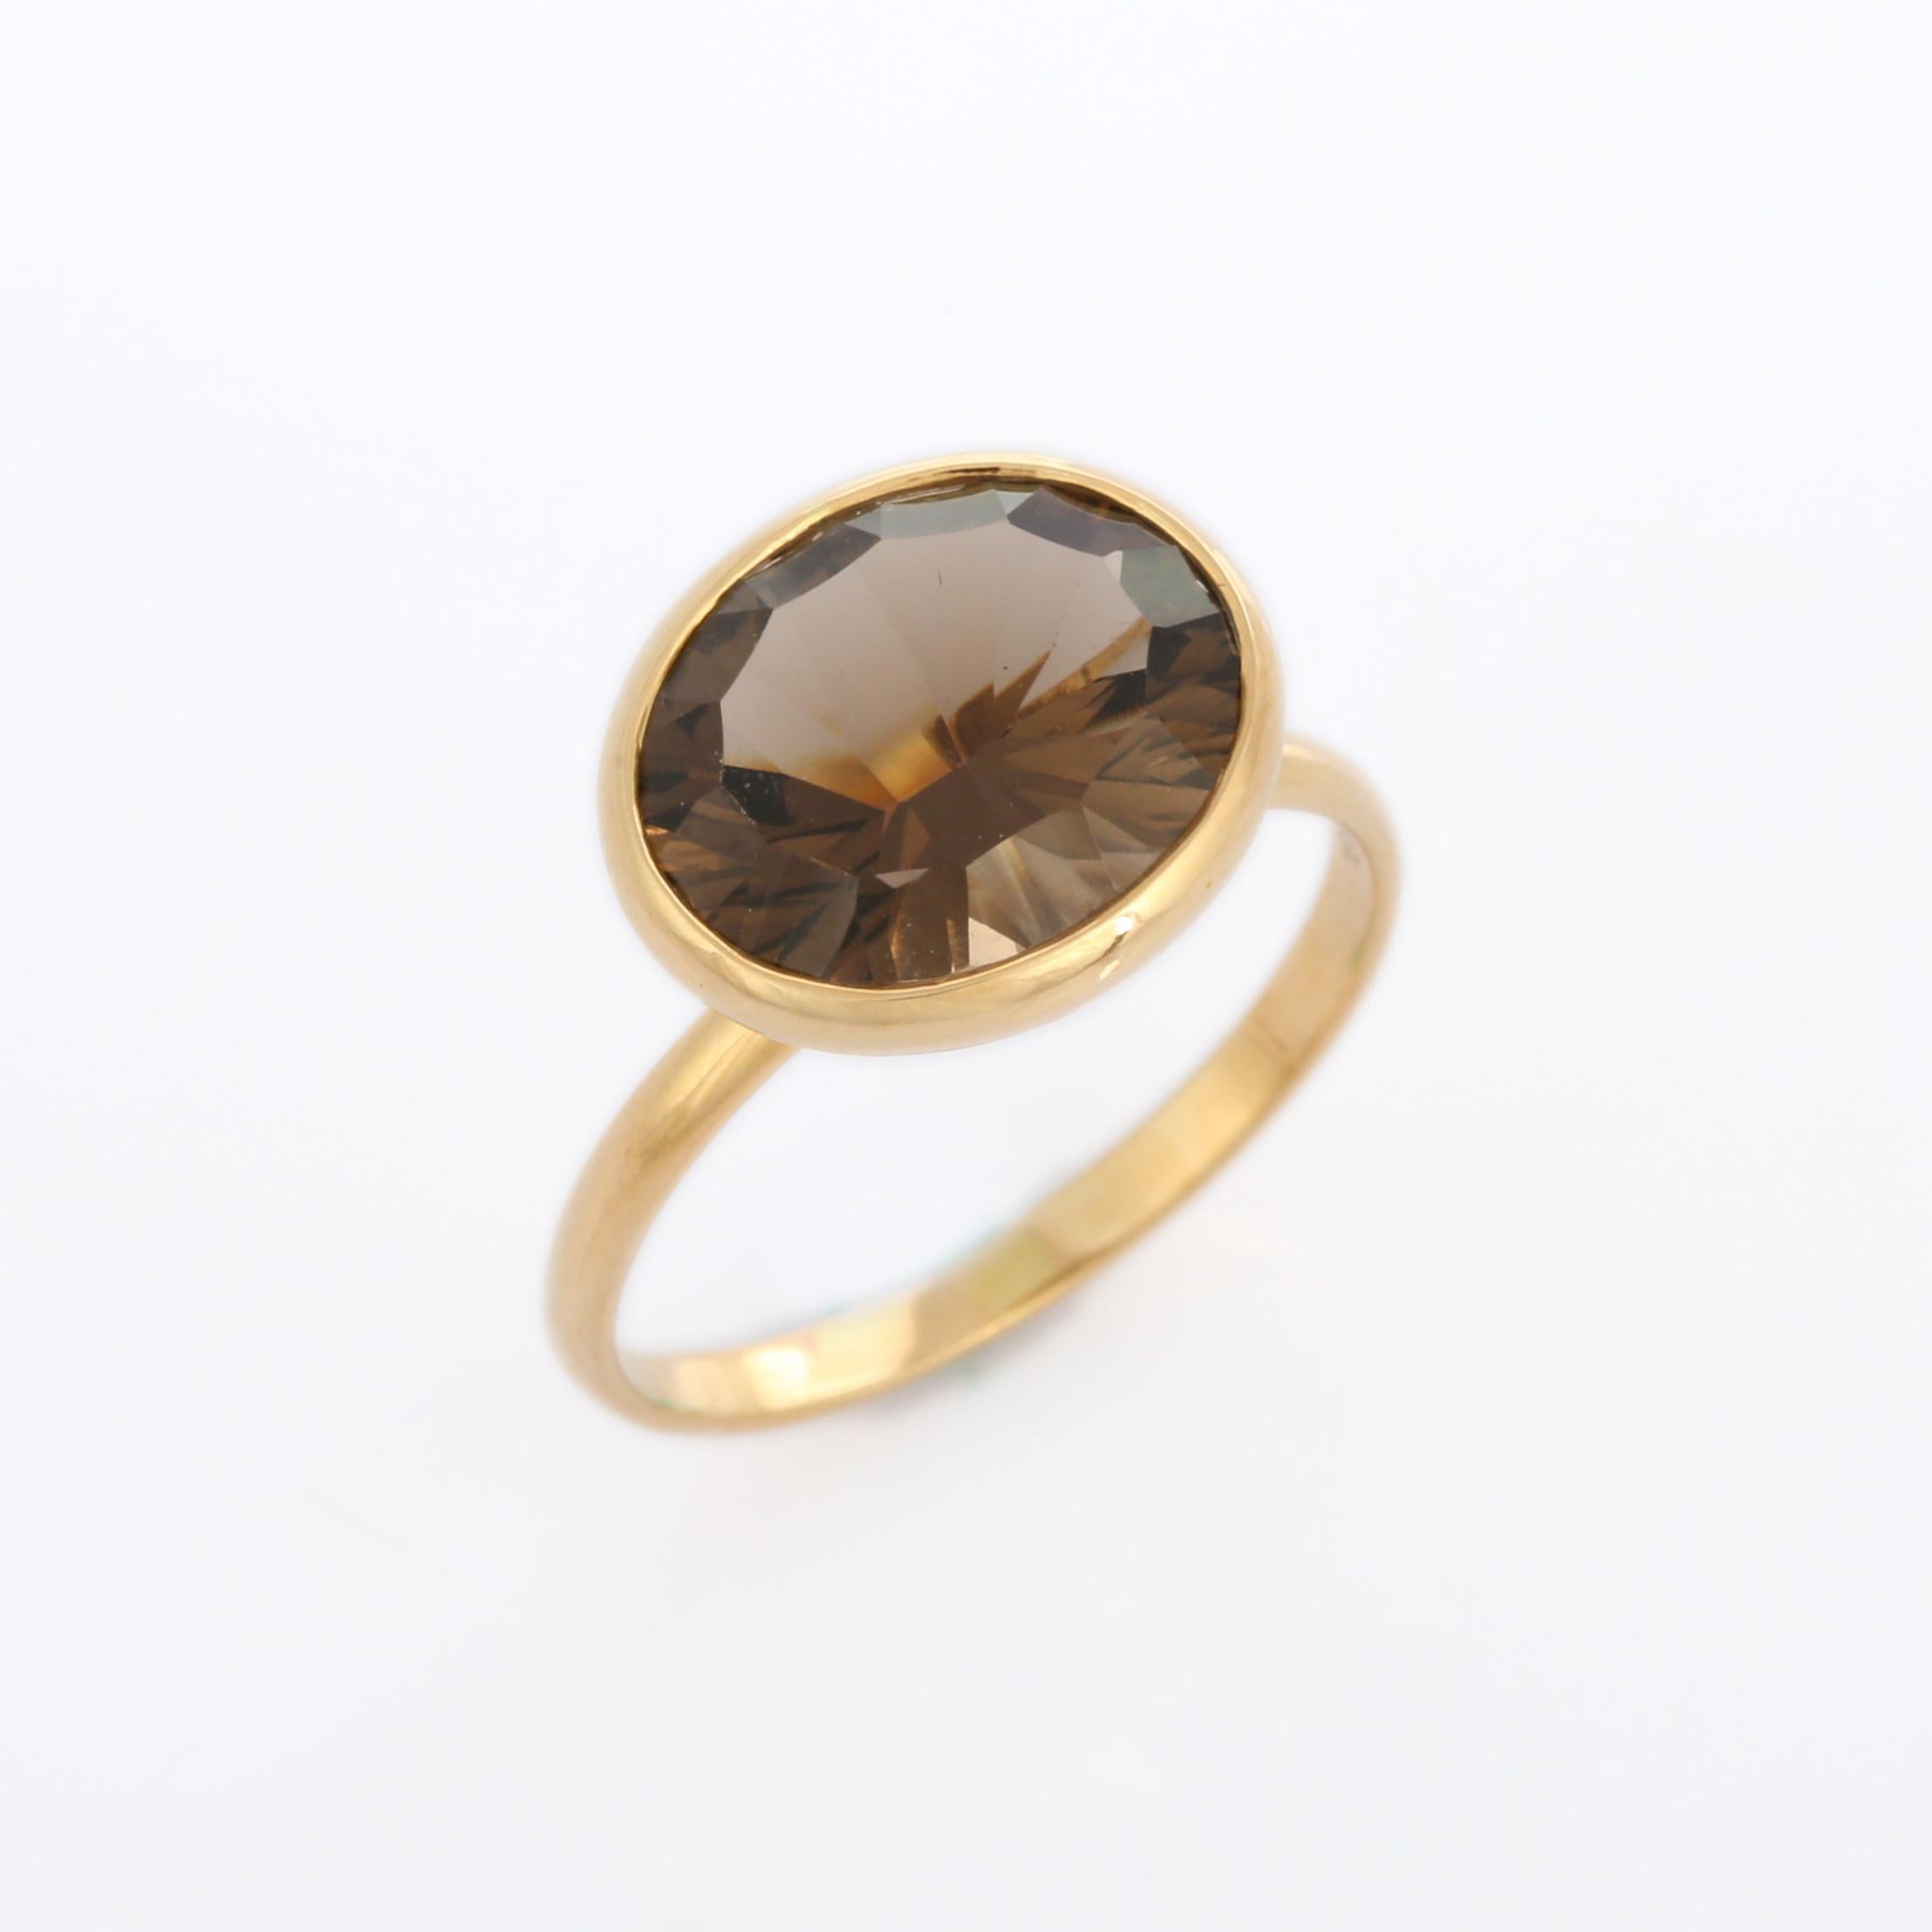 For Sale:  Horizontal Oval Cut Smokey Topaz 18K Yellow Gold Solitaire Ring   4